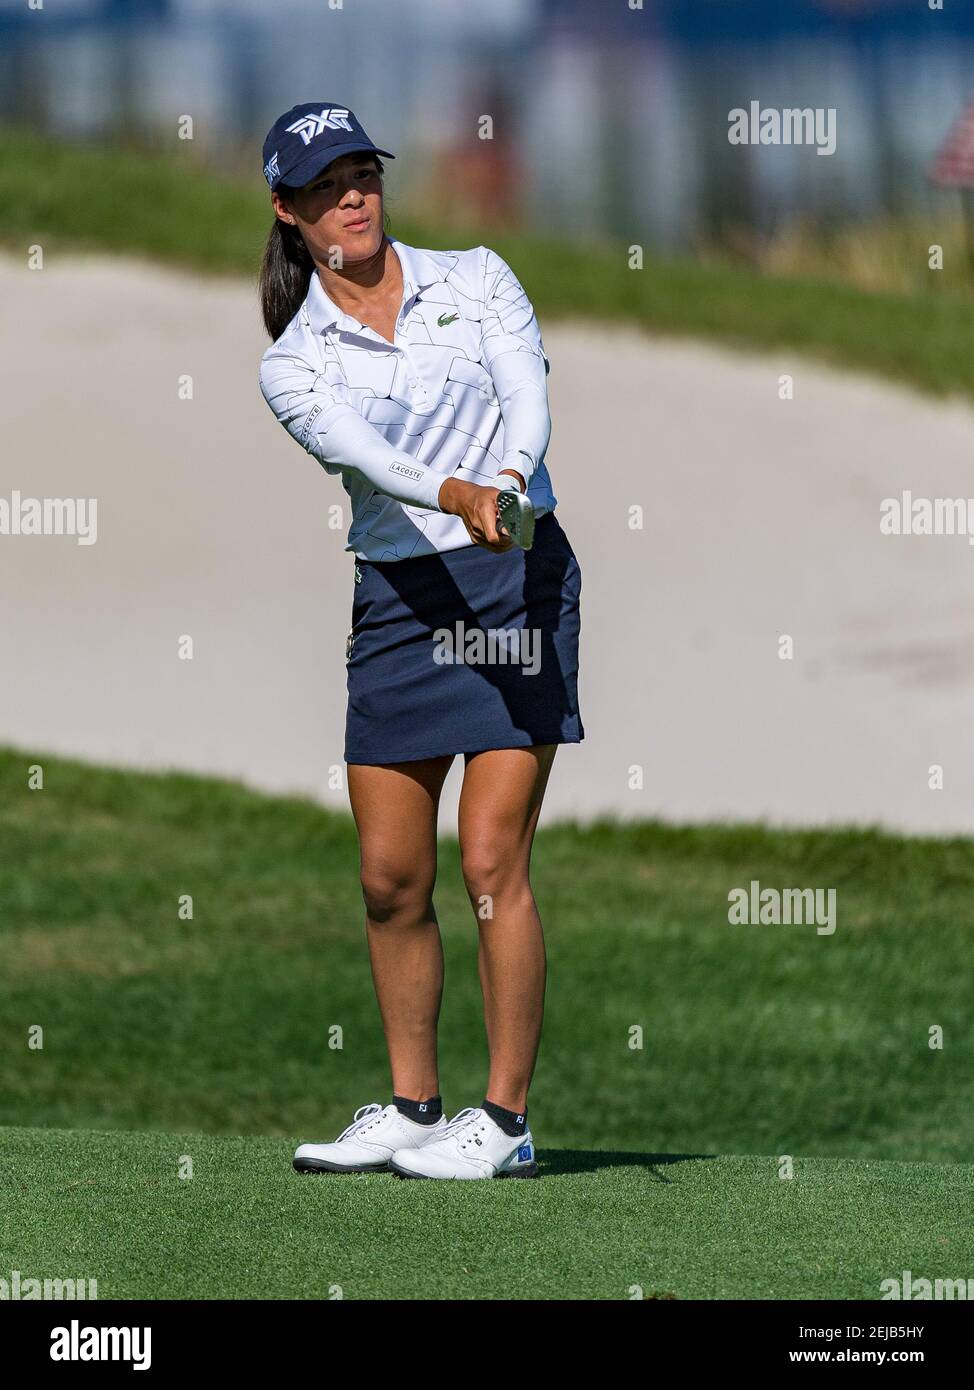 January 16, 2020 - Lake Buena Vista, FL, U.S: Celine Boutier of France  during 1st round of Diamond Resorts Tournament of Champions Presented by  Insurance Office of America held at Tranquilo Golf